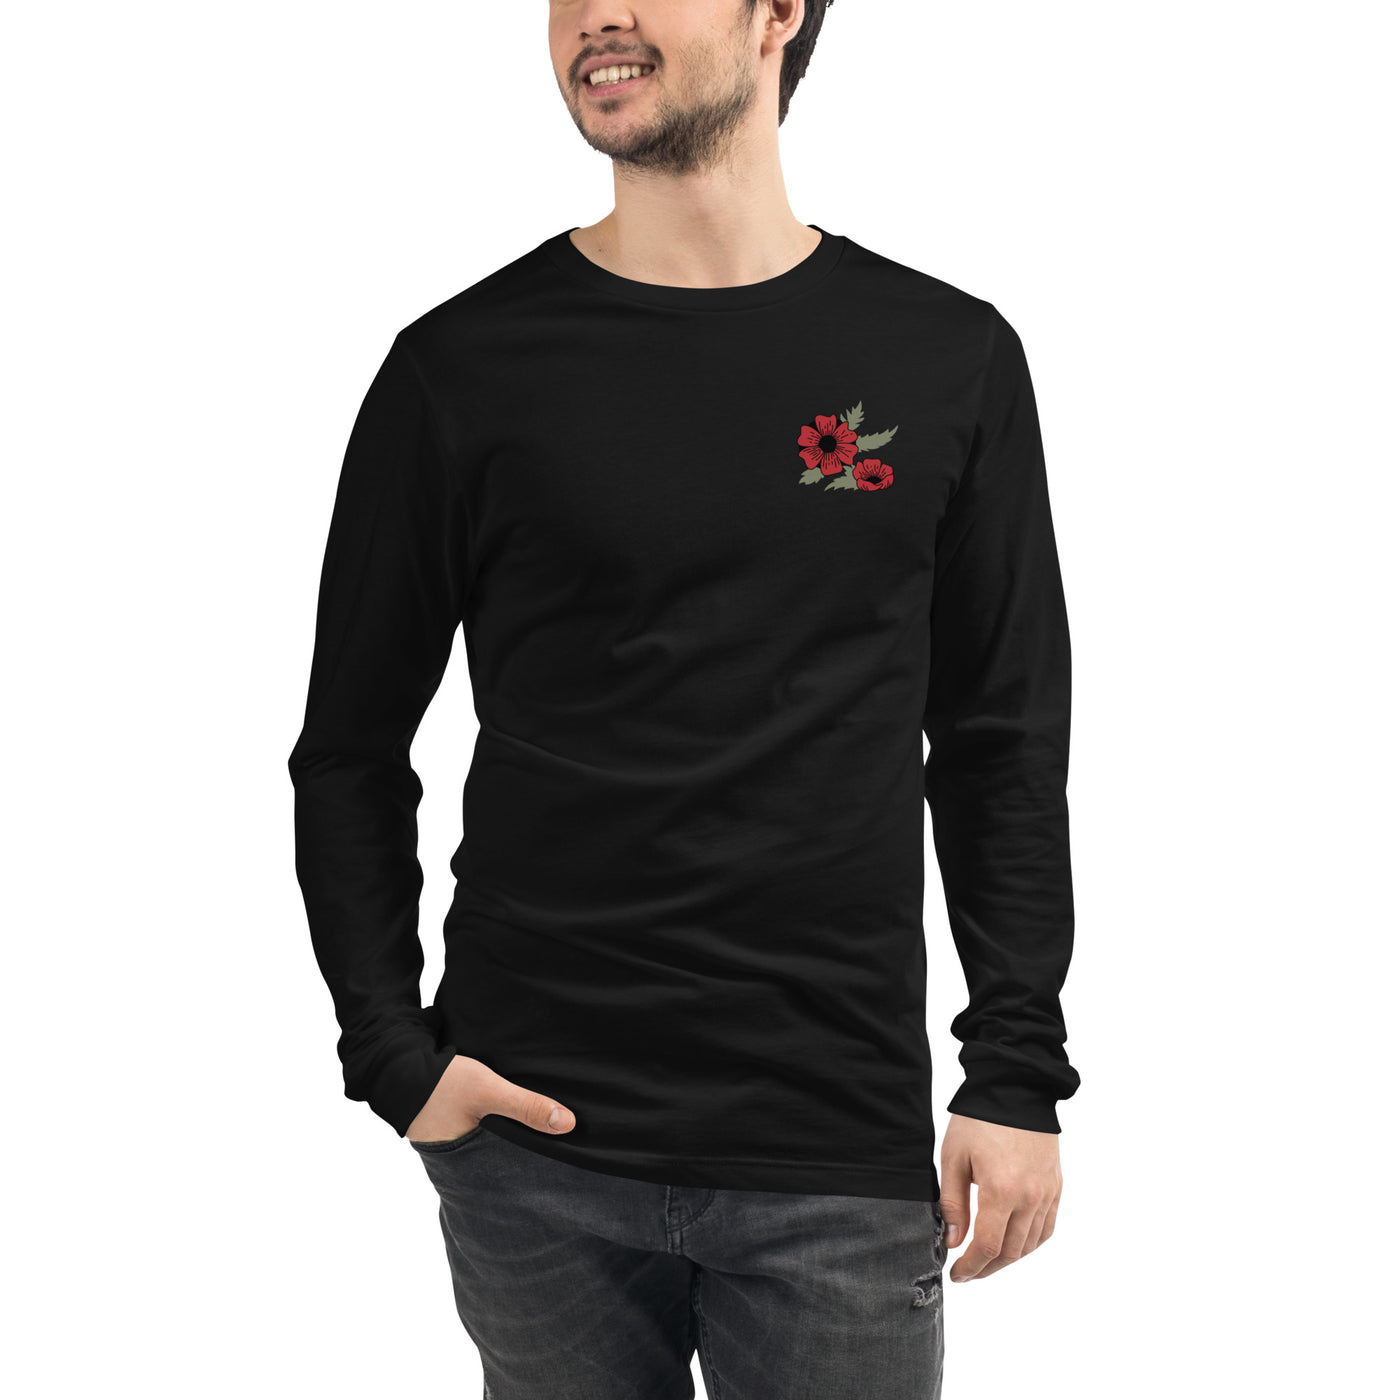 Remembrance Poppies Long Sleeve Shirt Print